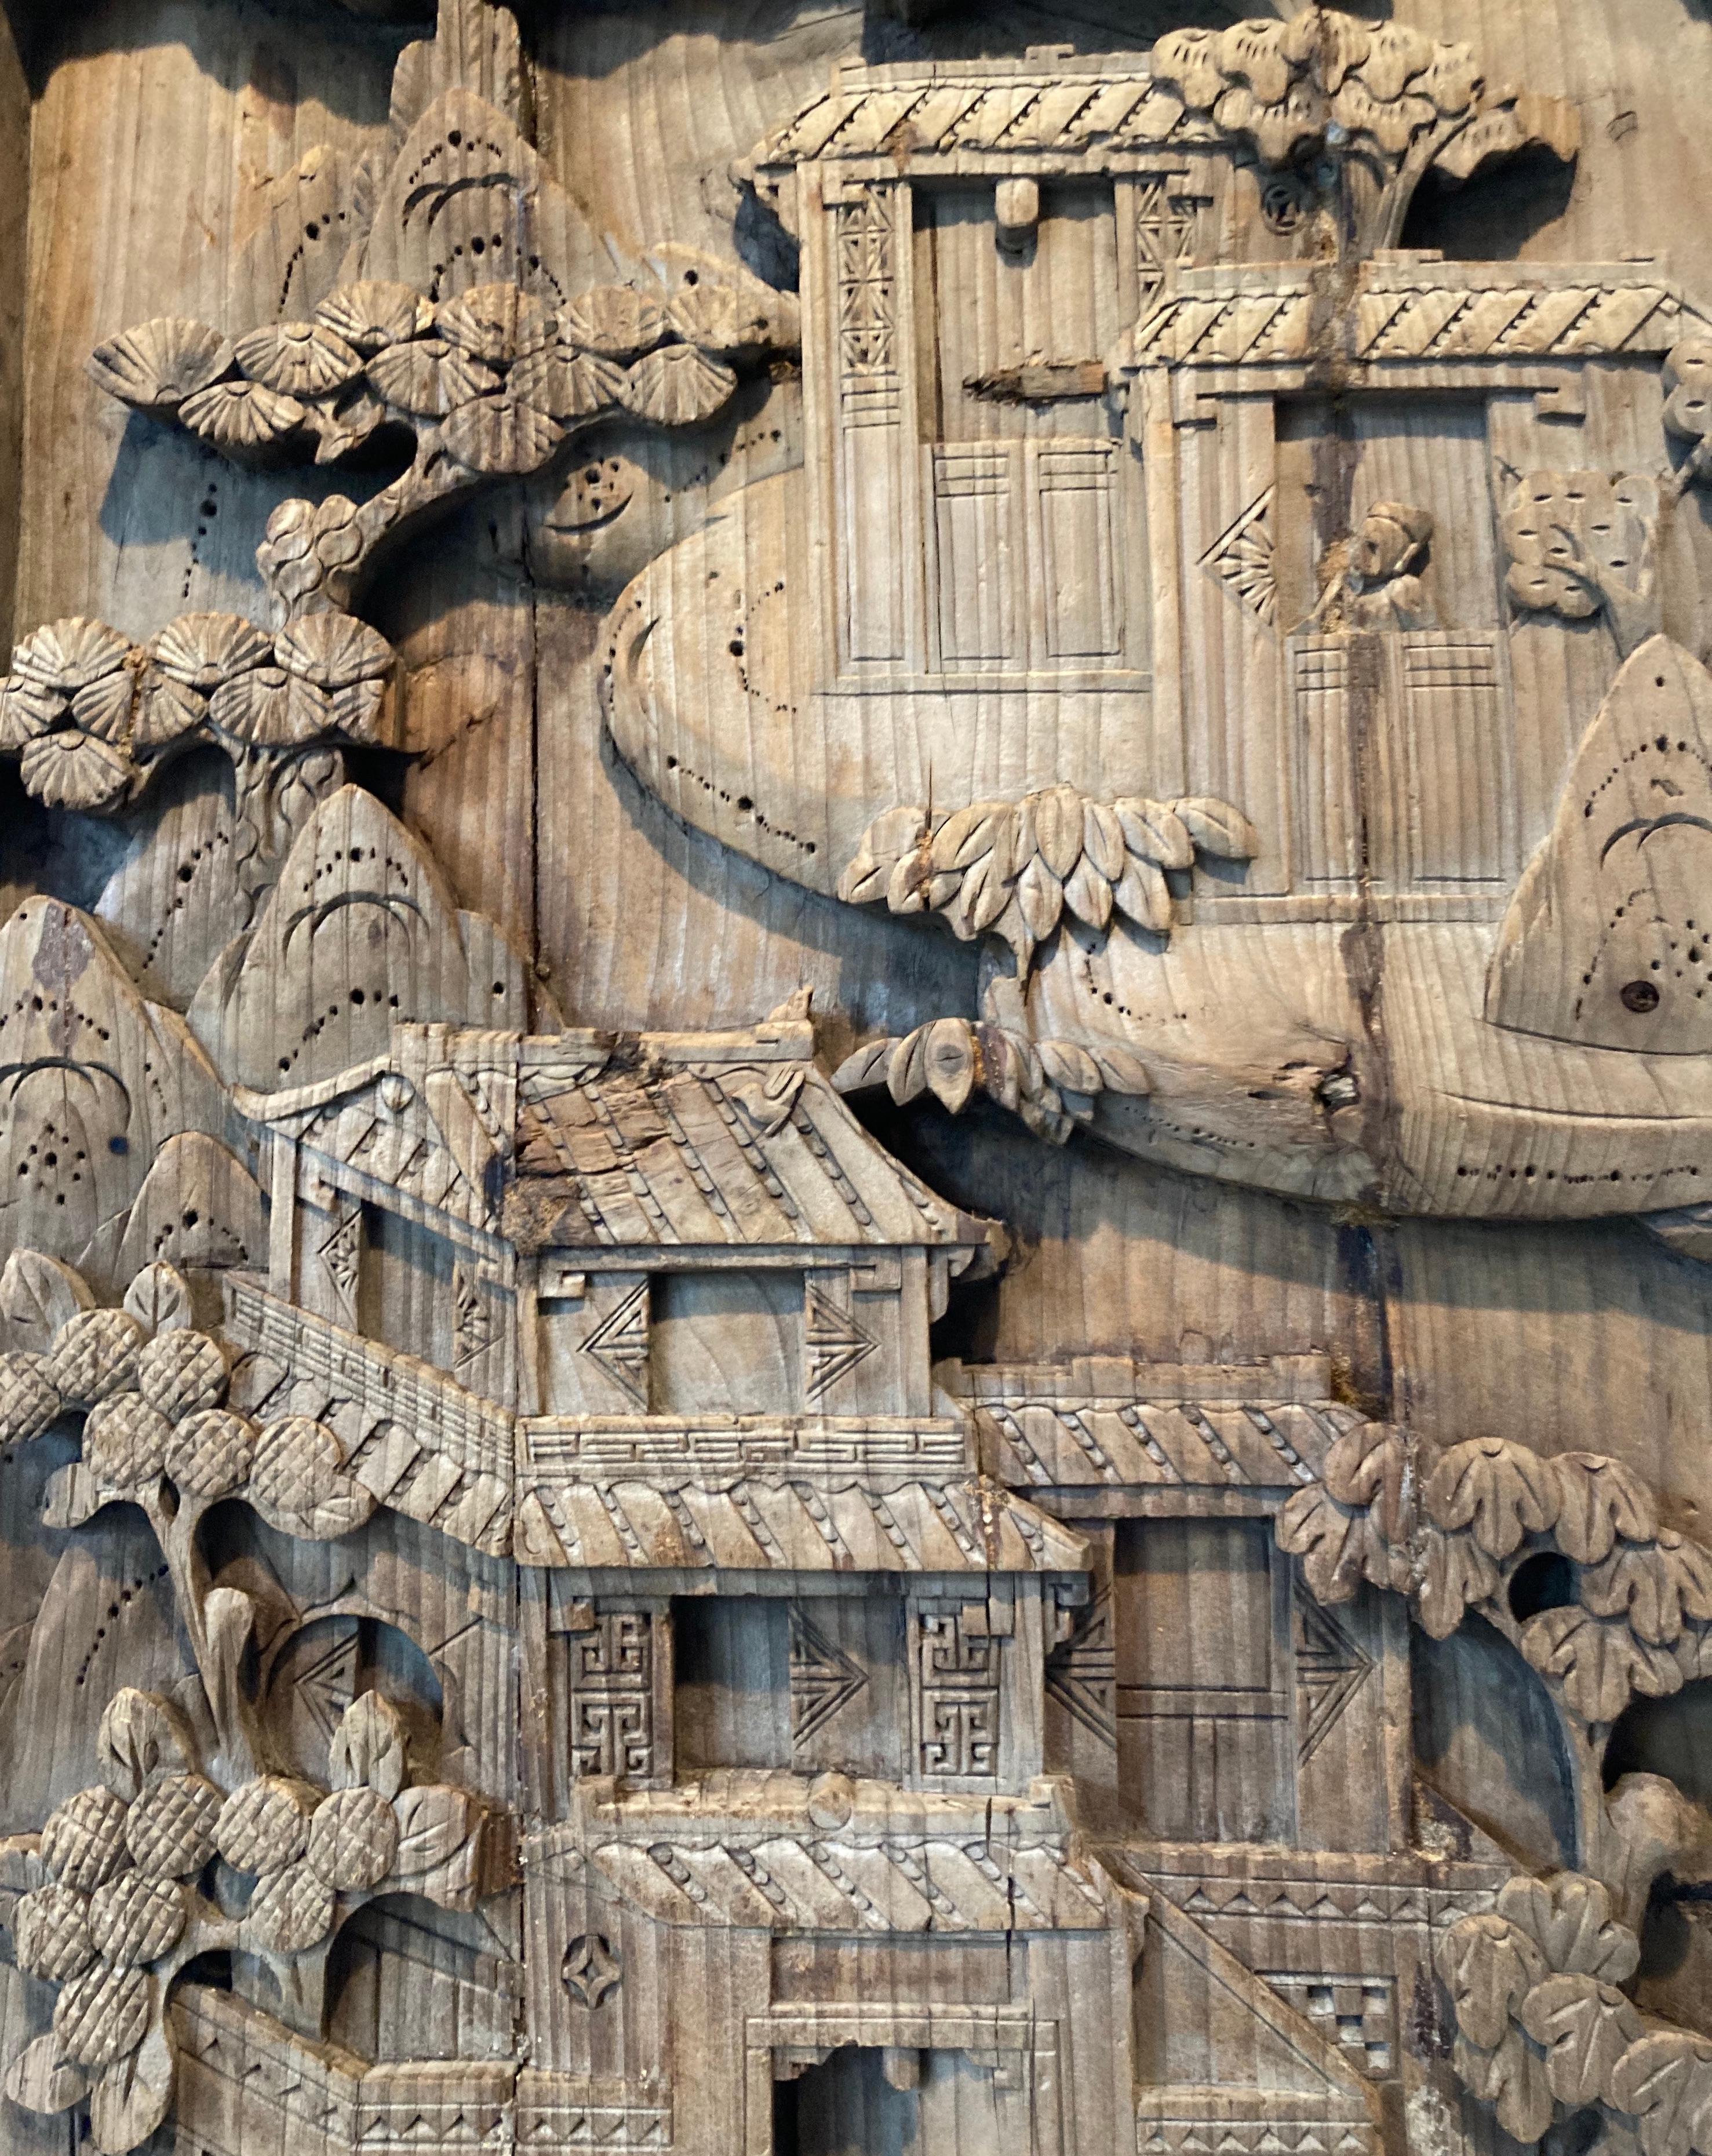 Unframed panel with relief carving. Joined plank carving with dwelling in the clouds motif.